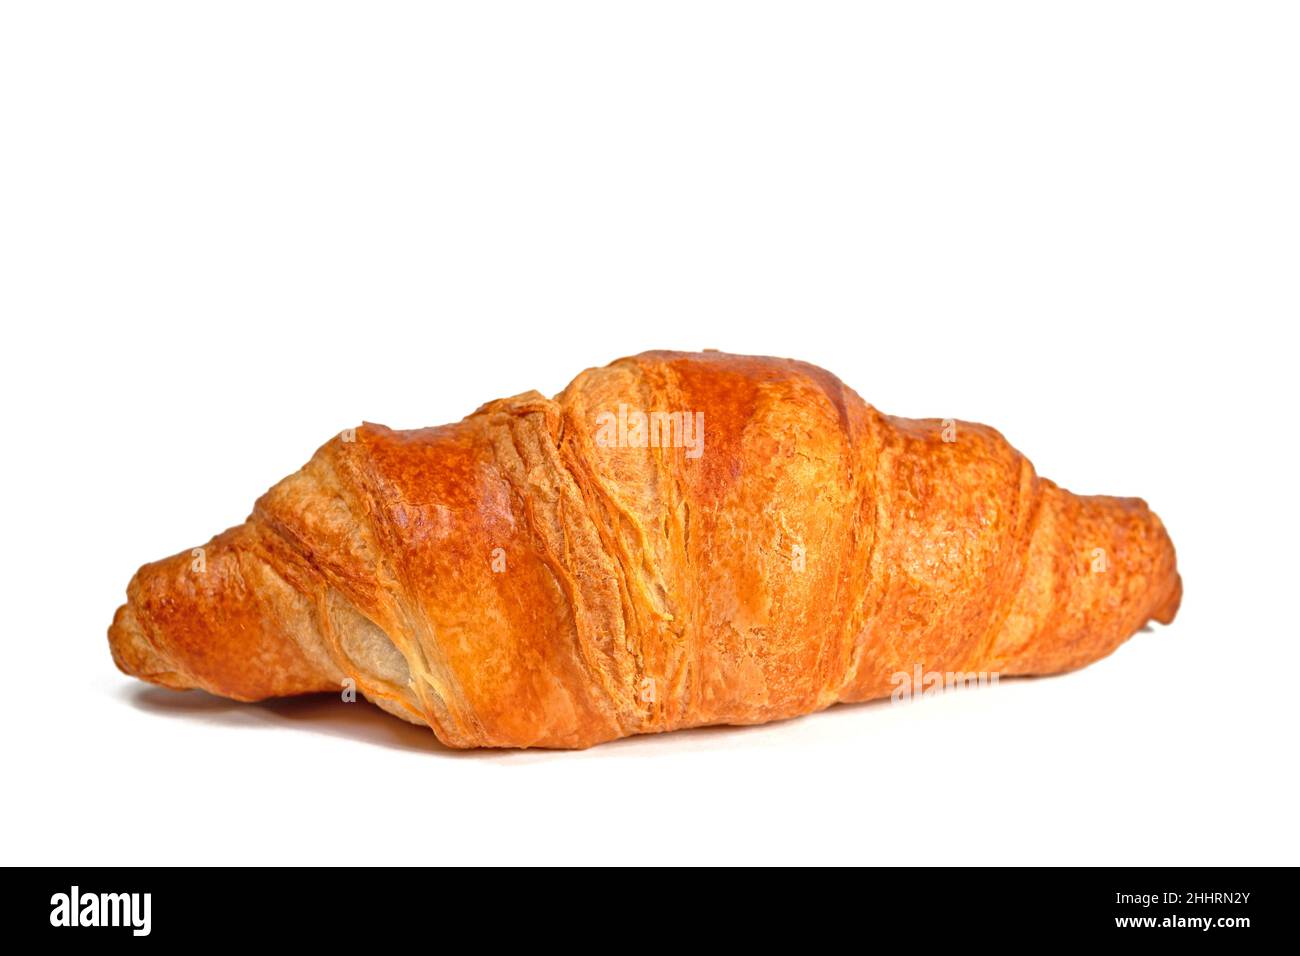 Croissant pastry isolated against white background Stock Photo